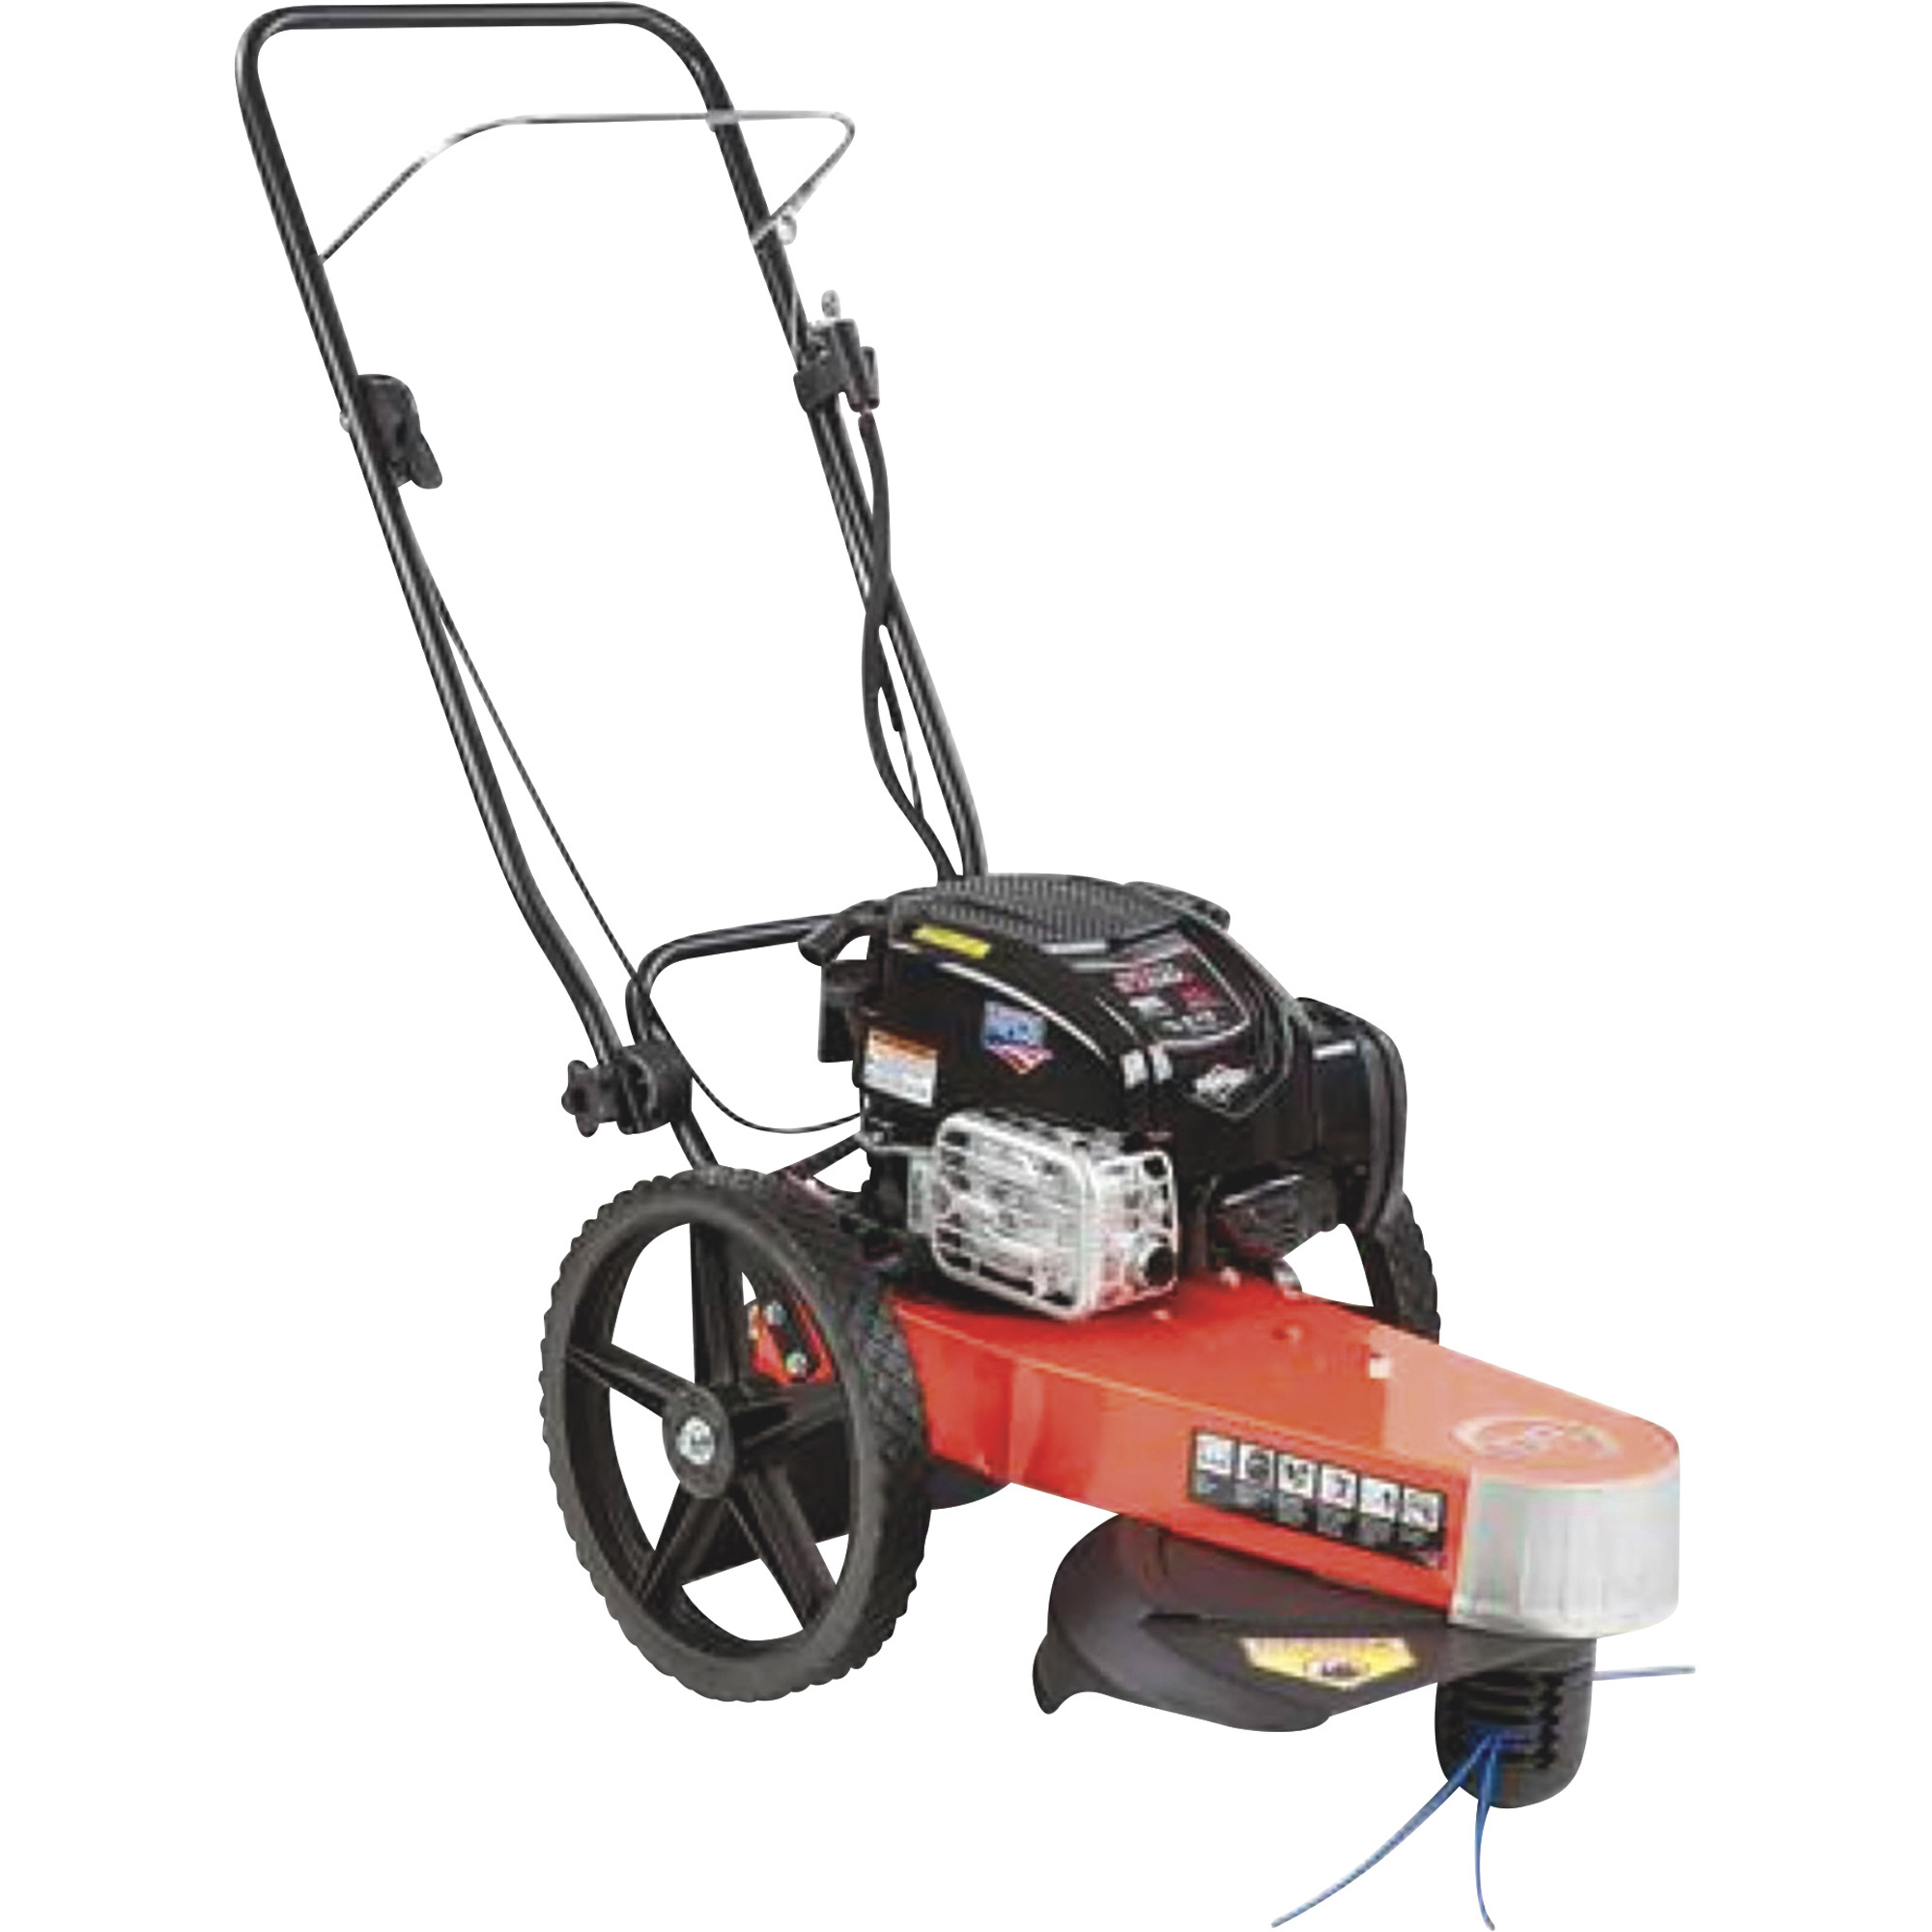 DR Power Premier Walk-Behind Trimmer Mower with Manual Start, 7.25 Ft./Lb. Torque, 163cc Engine, 22Inch Cutting Path, Model TR43072BMN -  DR Power Equipment